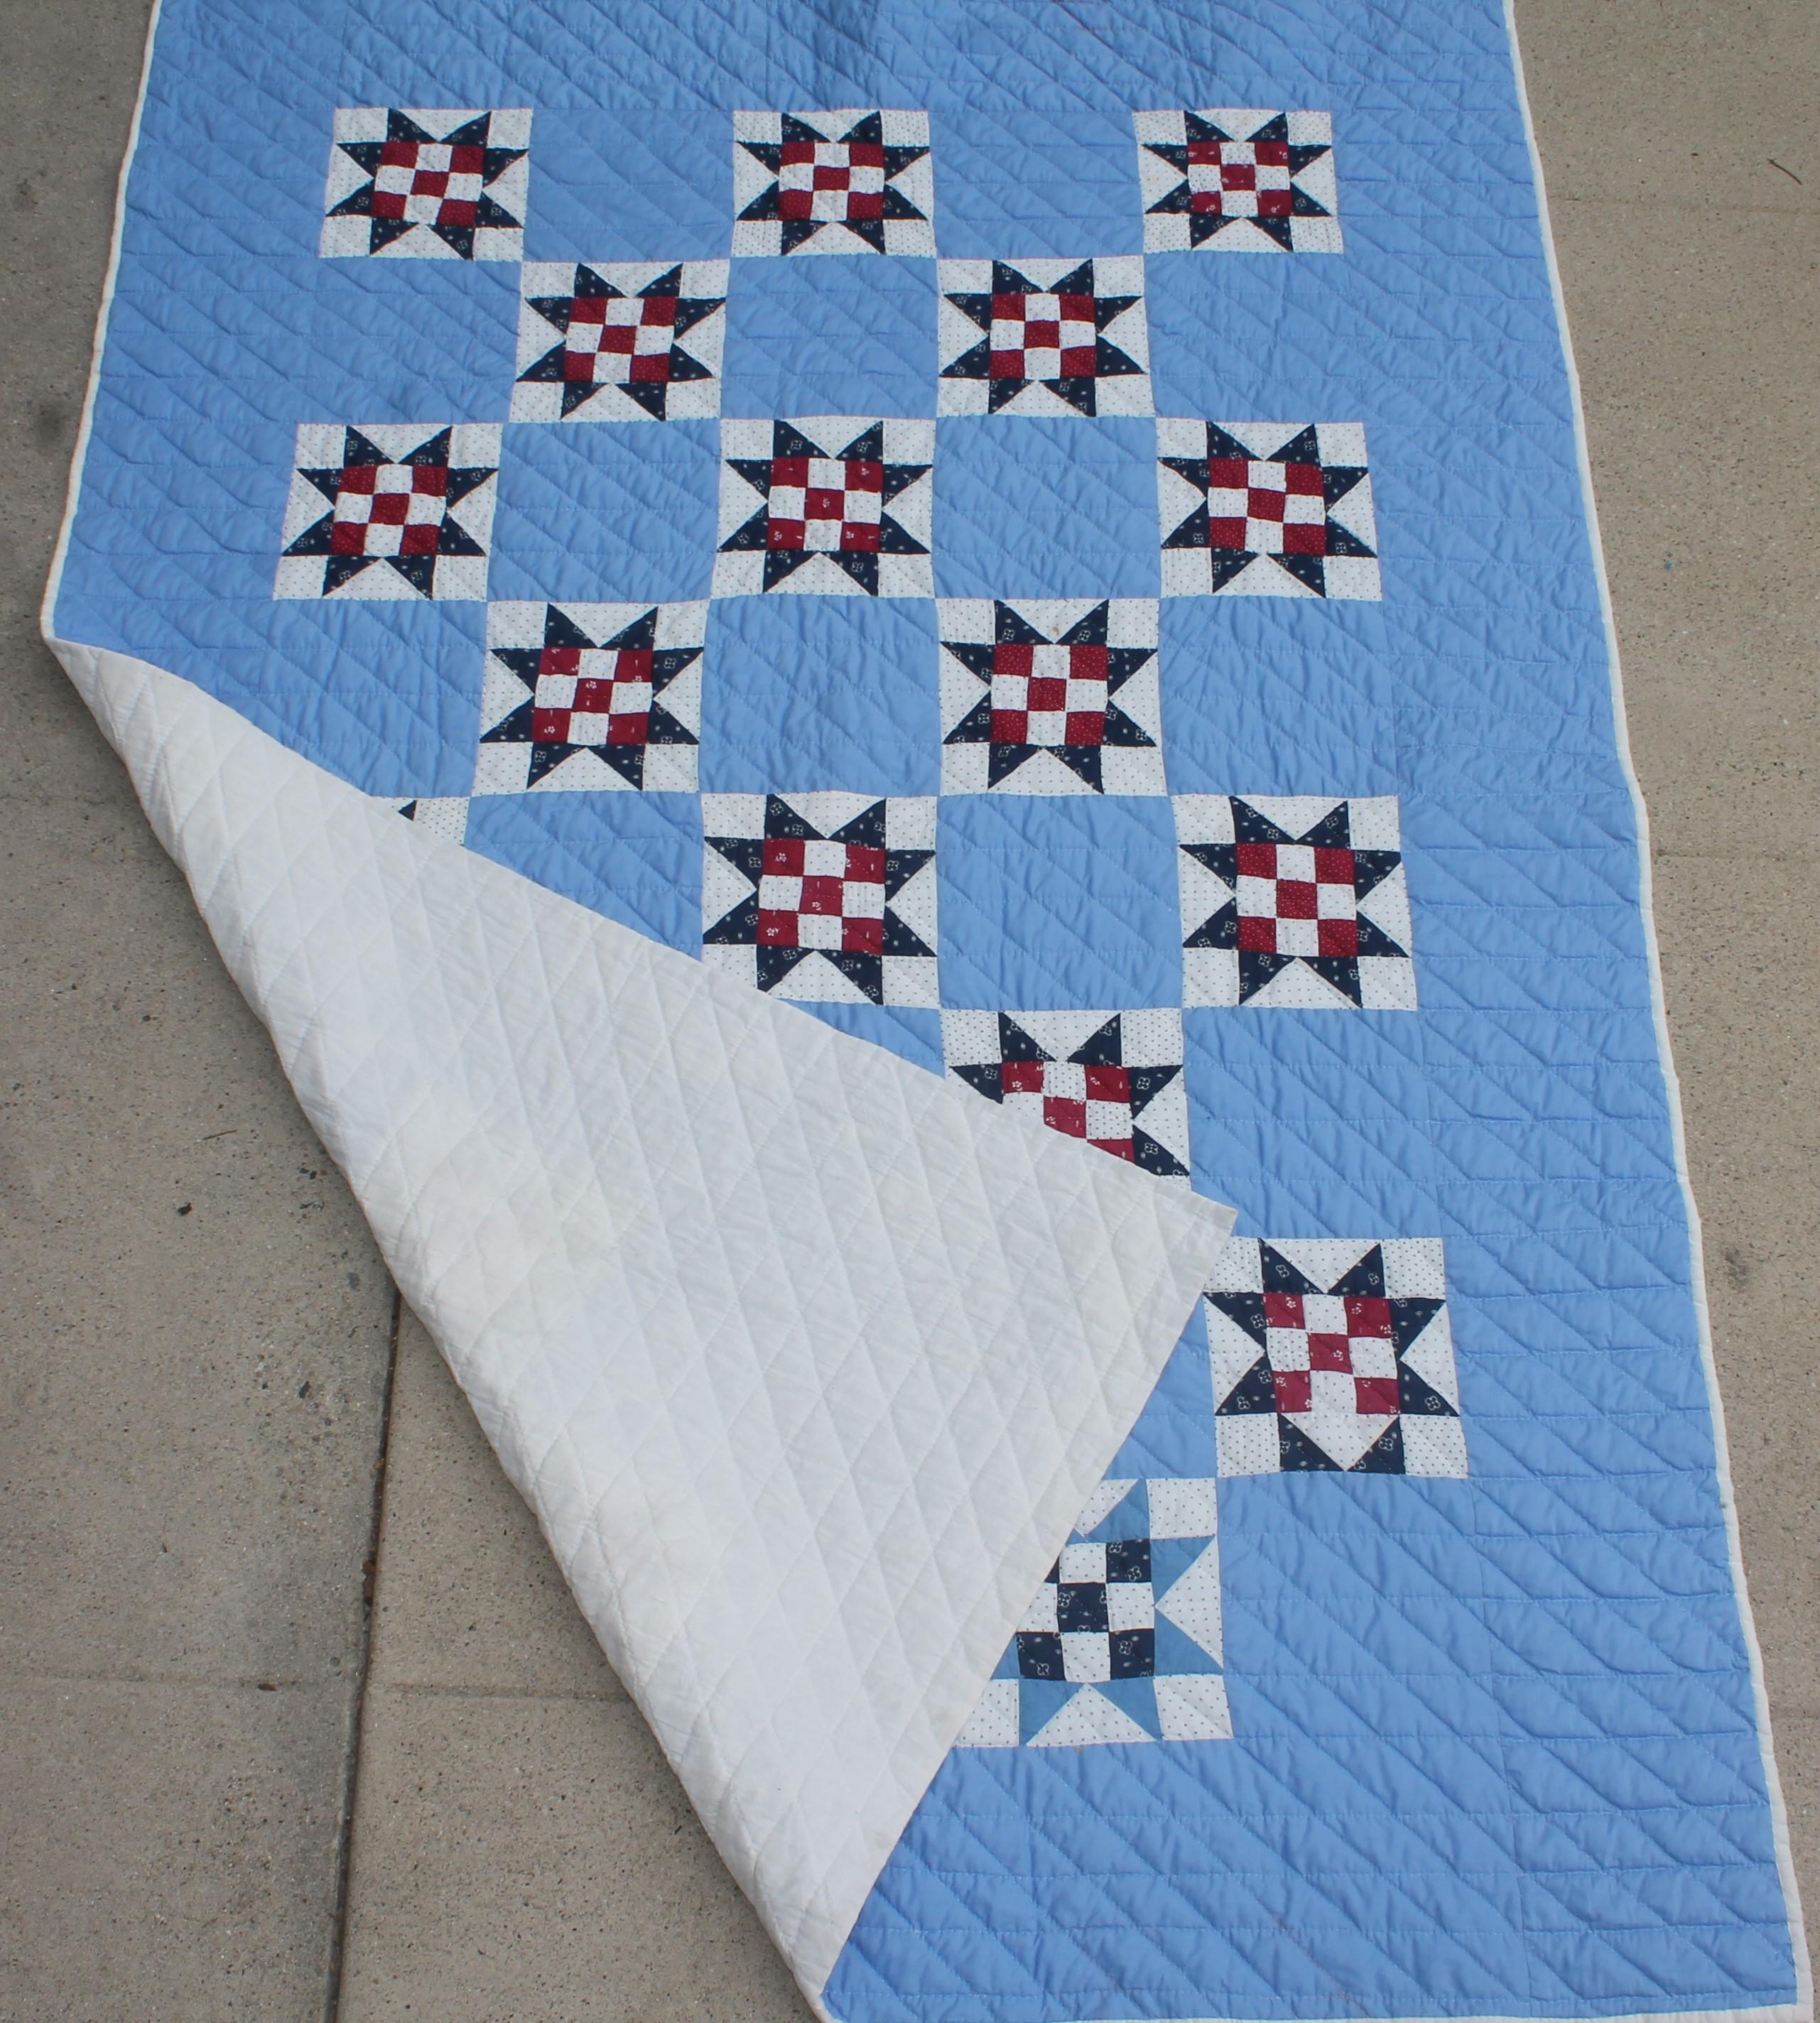 1940s Folky eight point star quilt with a nine patch inside each star. The backing is in a sky blue and all cotton. The condition is very good.